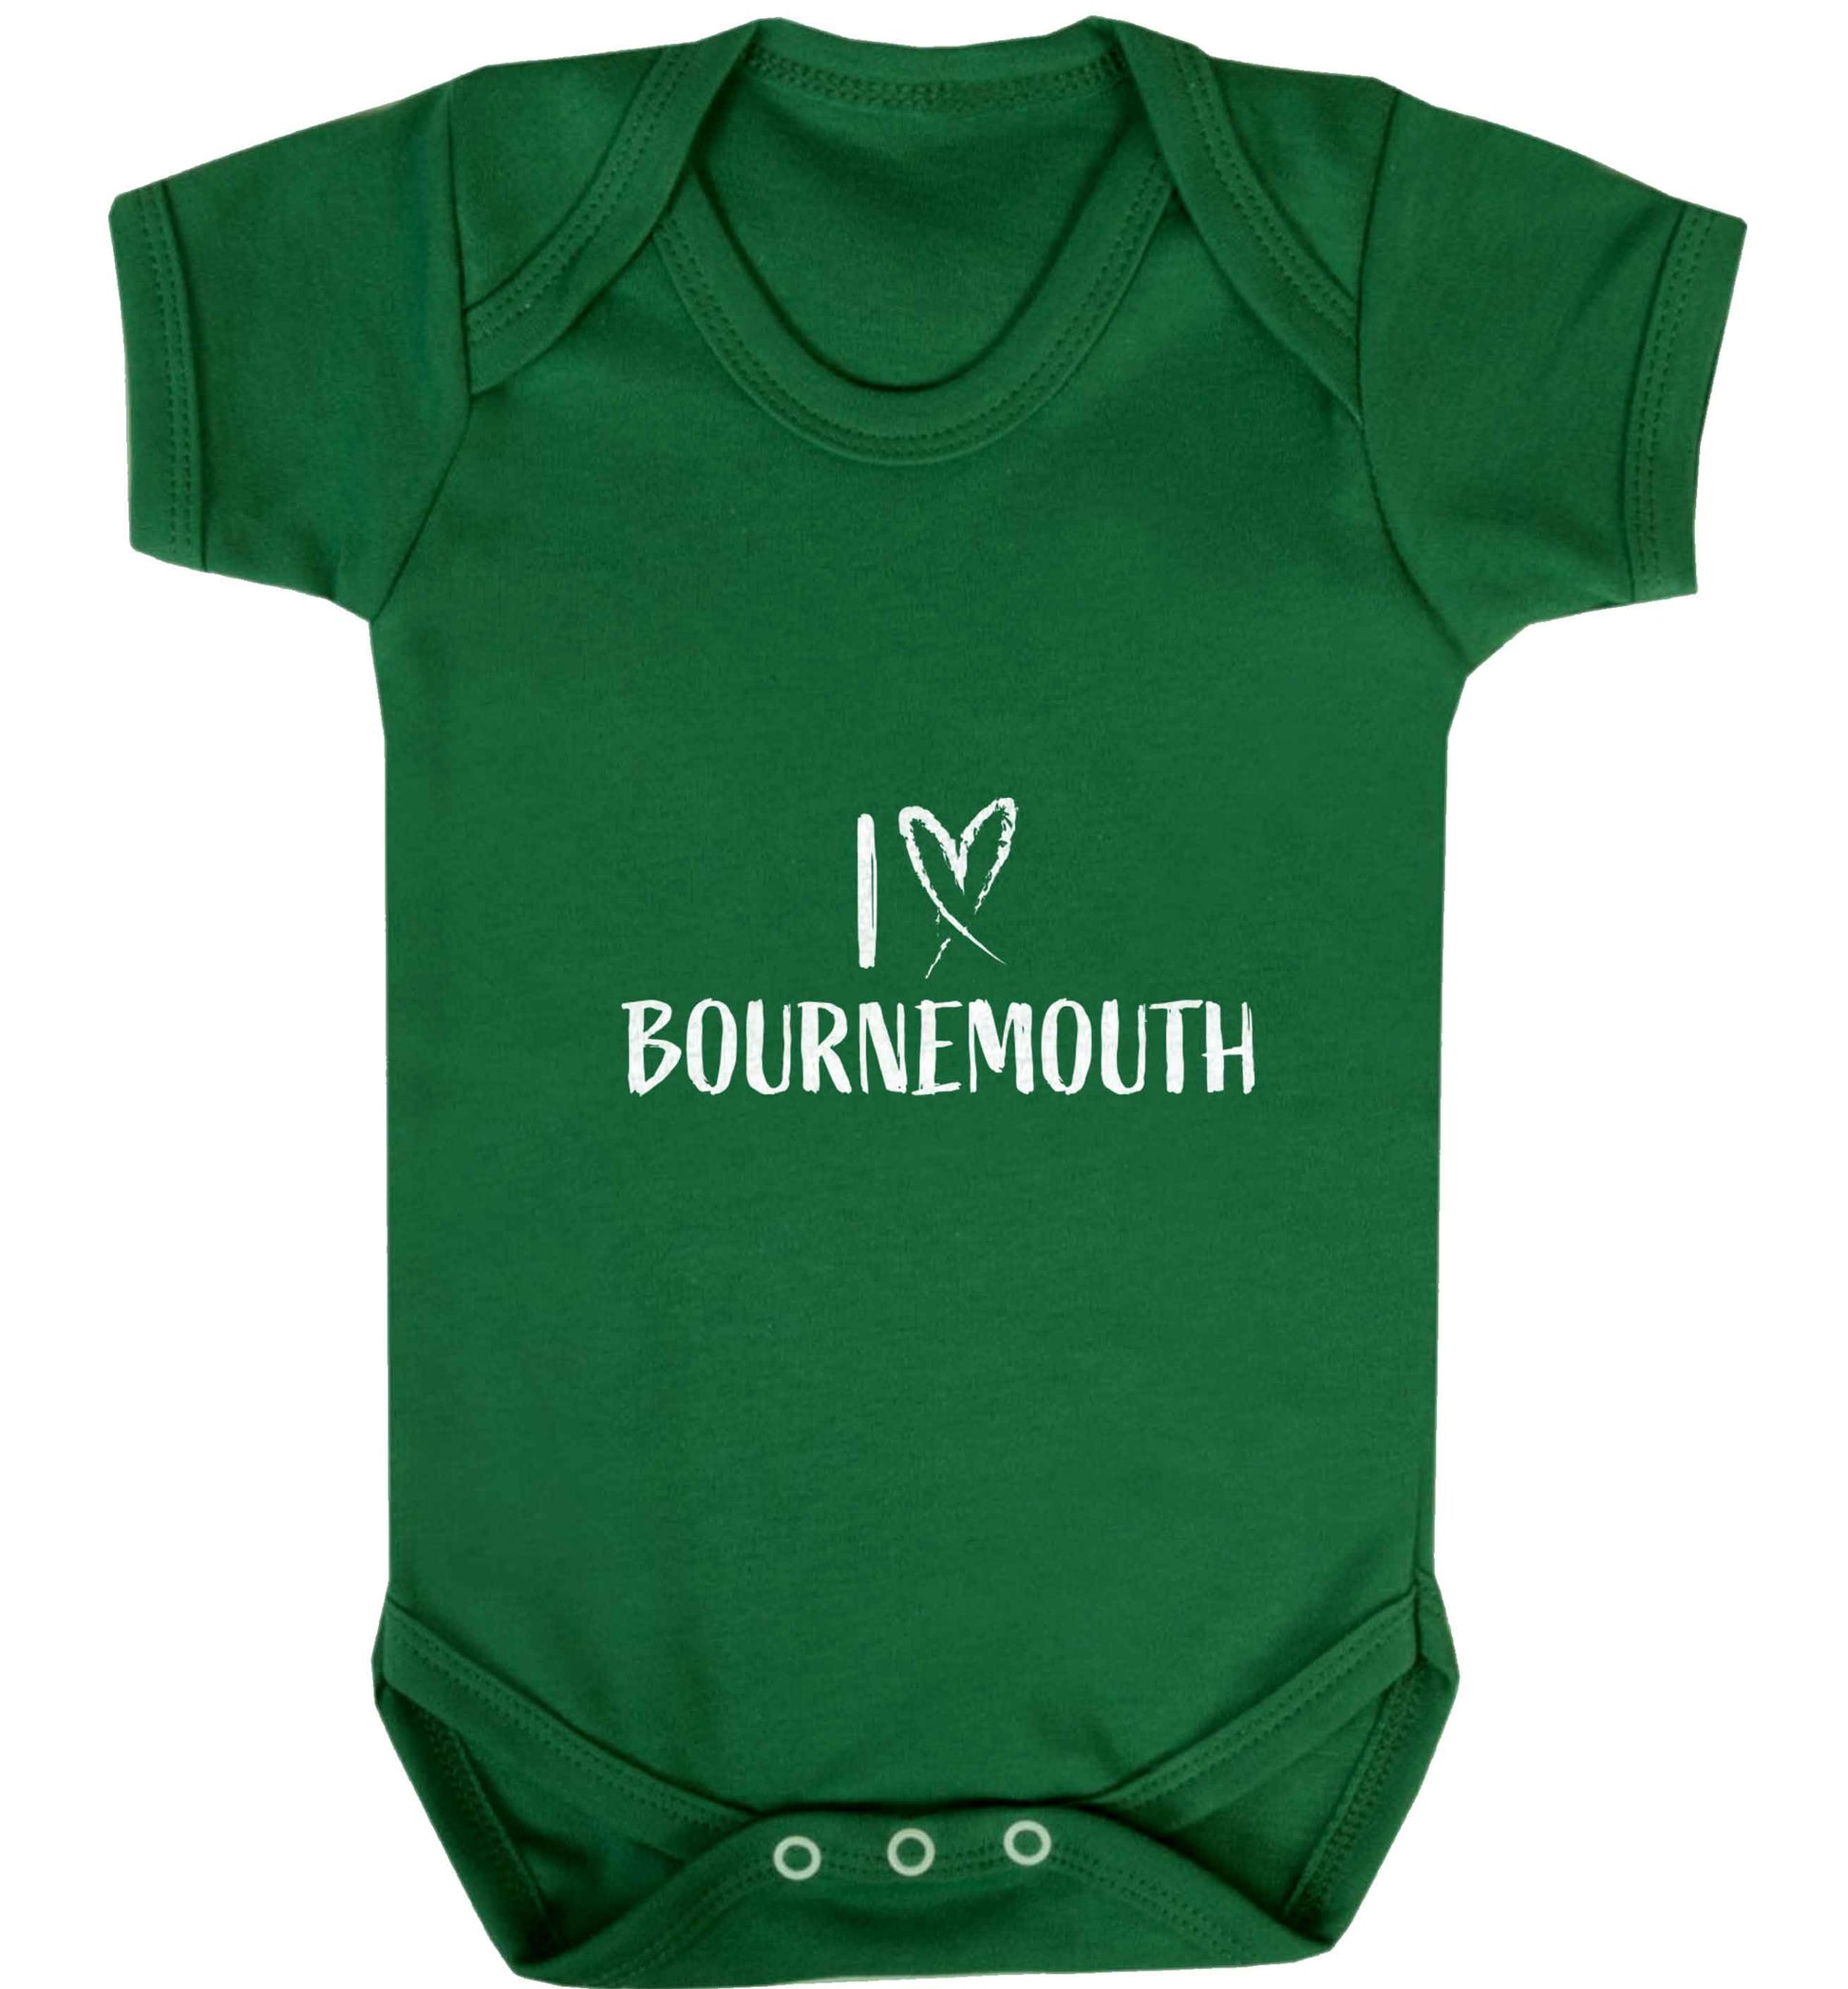 I love Bournemouth baby vest green 18-24 months